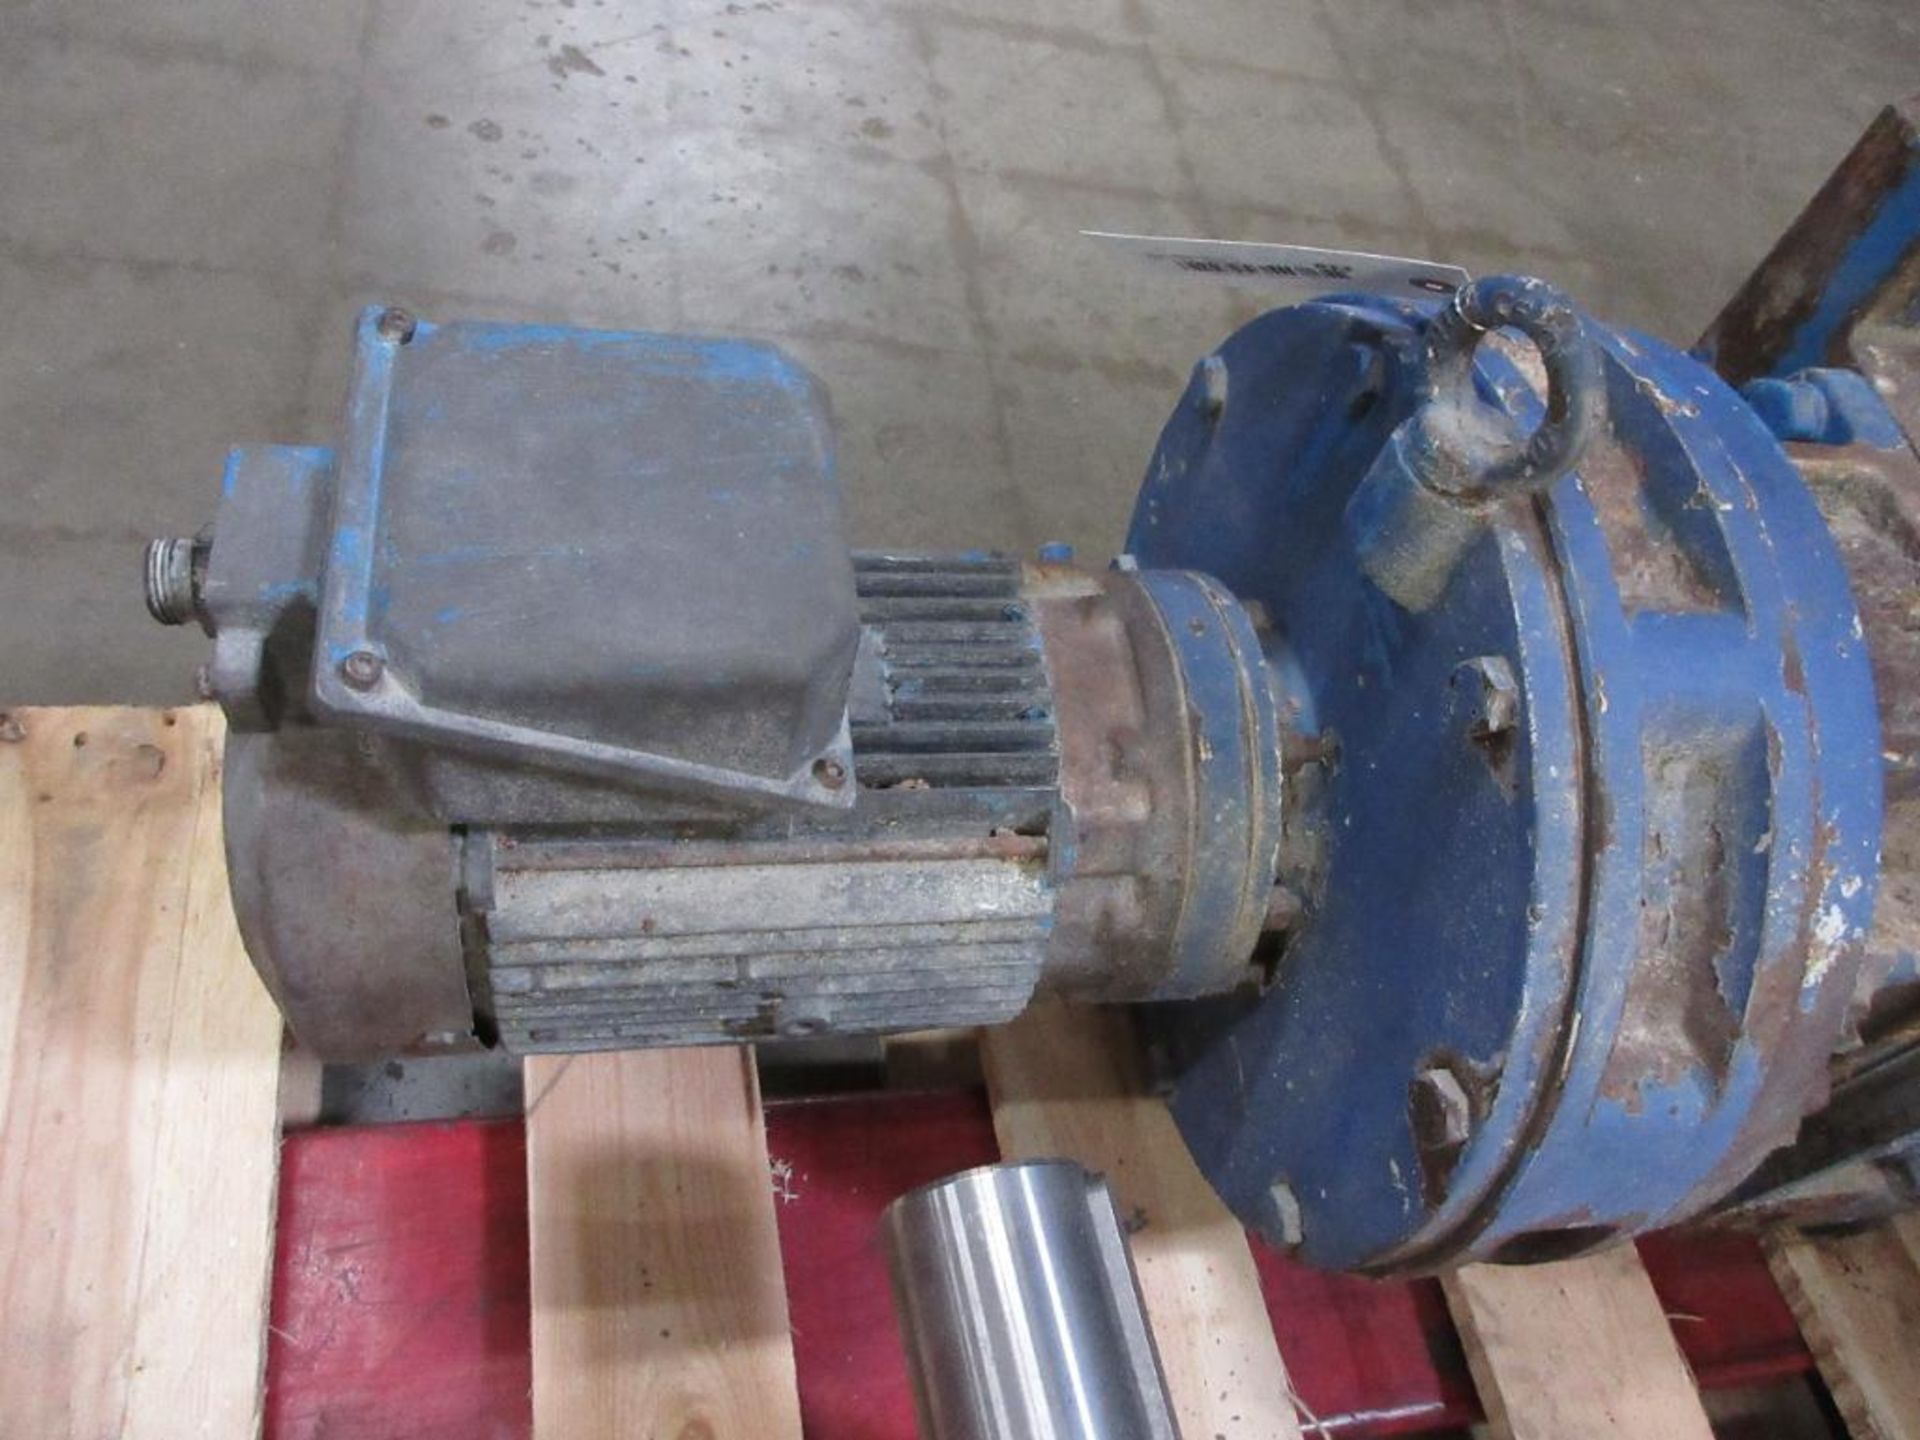 MISCELLANEOUS GEARBOX UNIDENTIFIED 647# LBS (THIS LOT IS FOB CAMARILLO CA) - (There will be a $40 Ri - Image 5 of 5